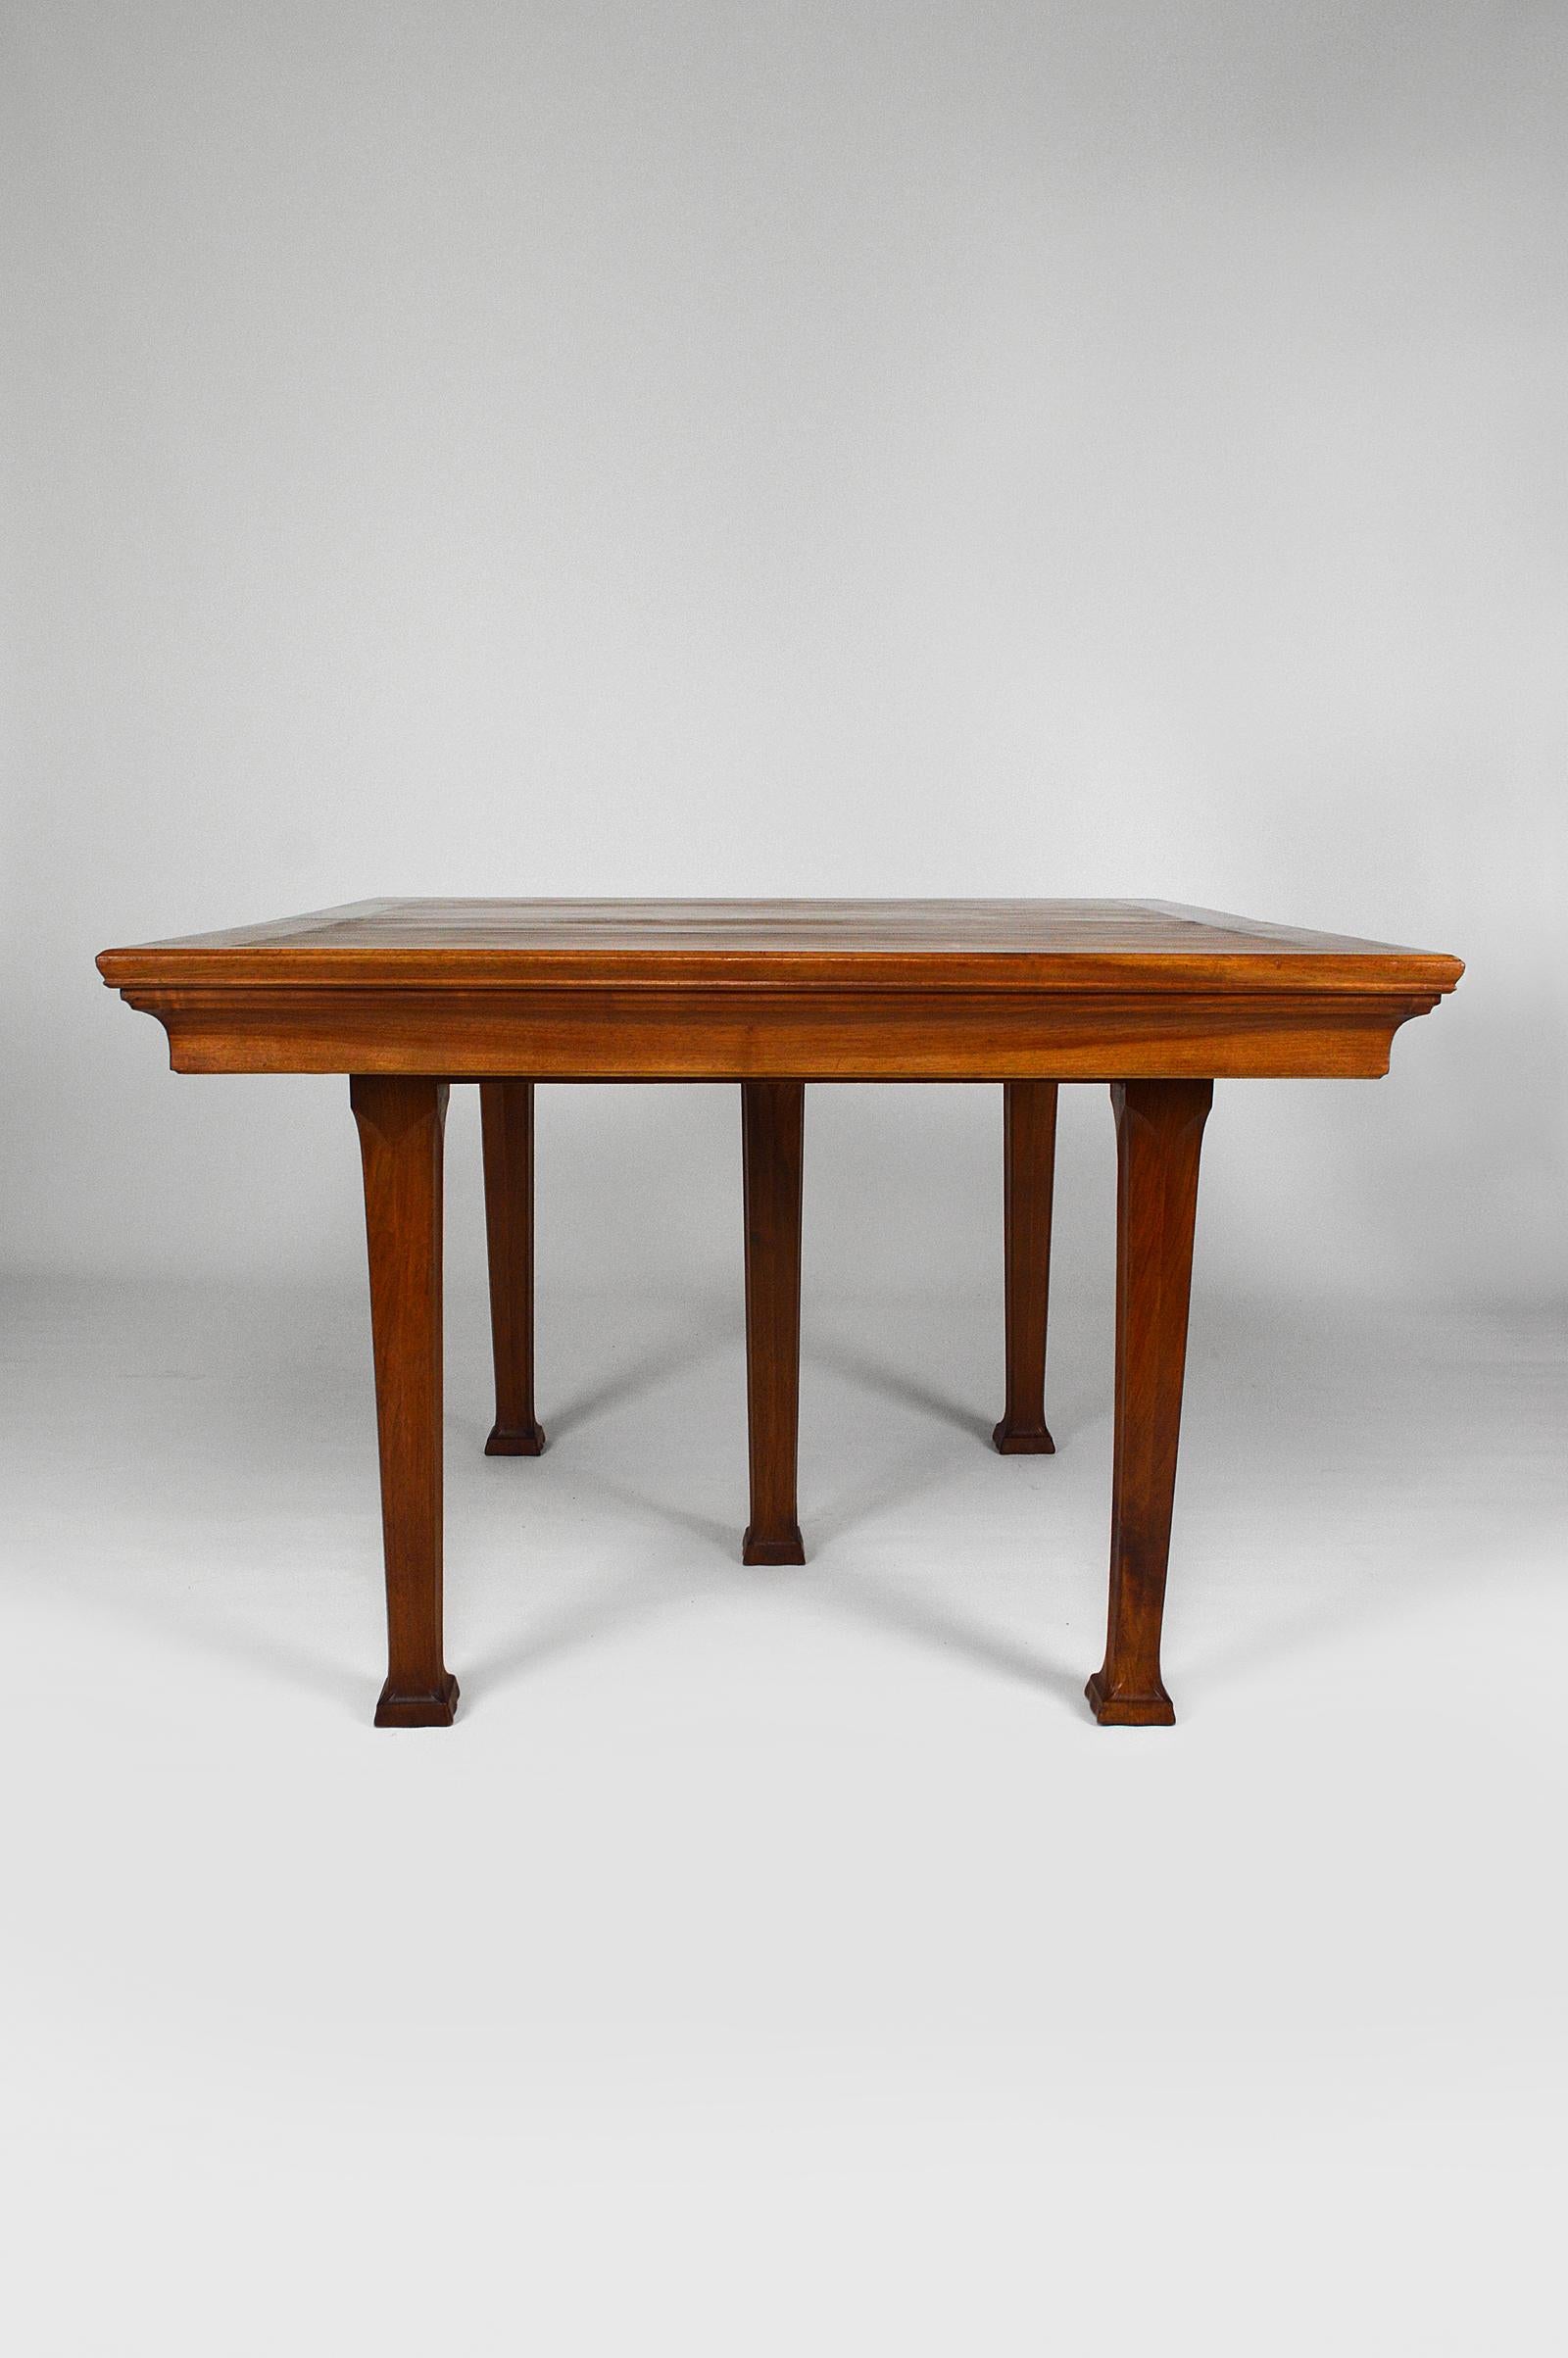 French Art Nouveau 5-Legged Dining Table in Walnut by G.E.Nowak, France, circa 1905